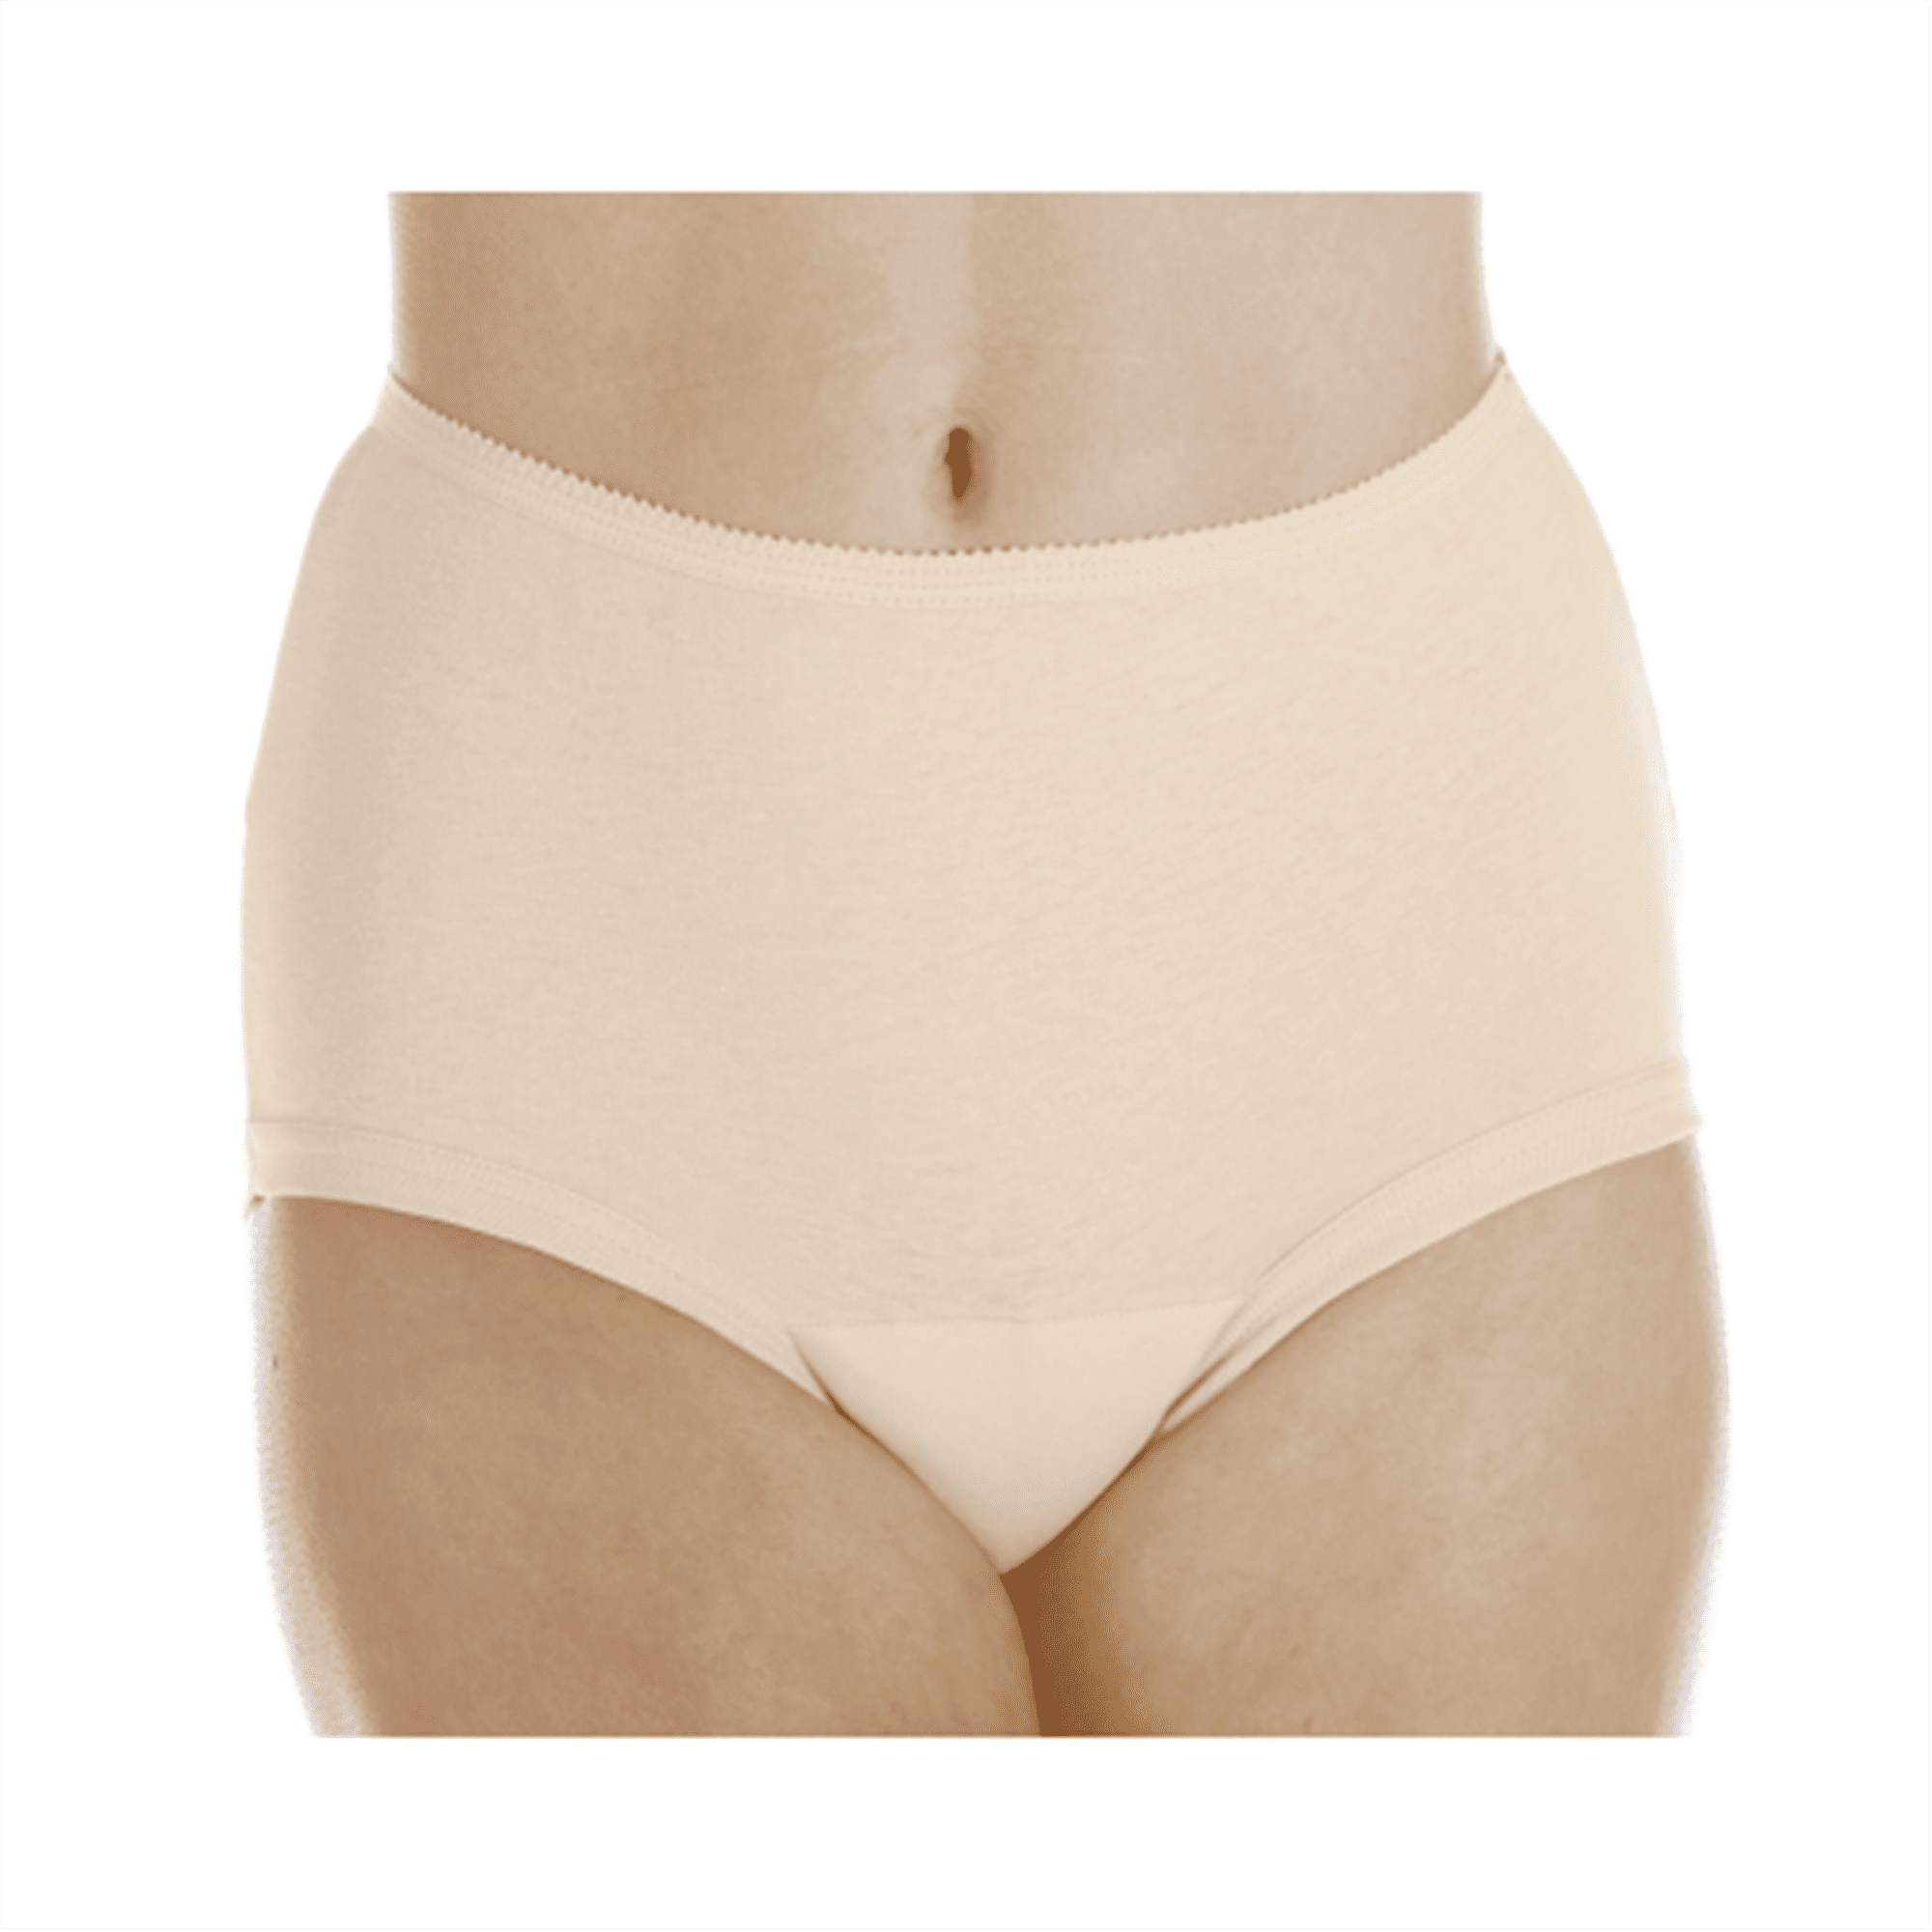 Wearever Women's Incontinence Underwear Banded Leg Bladder Control Briefs, Washable  Reusable Single Panty 